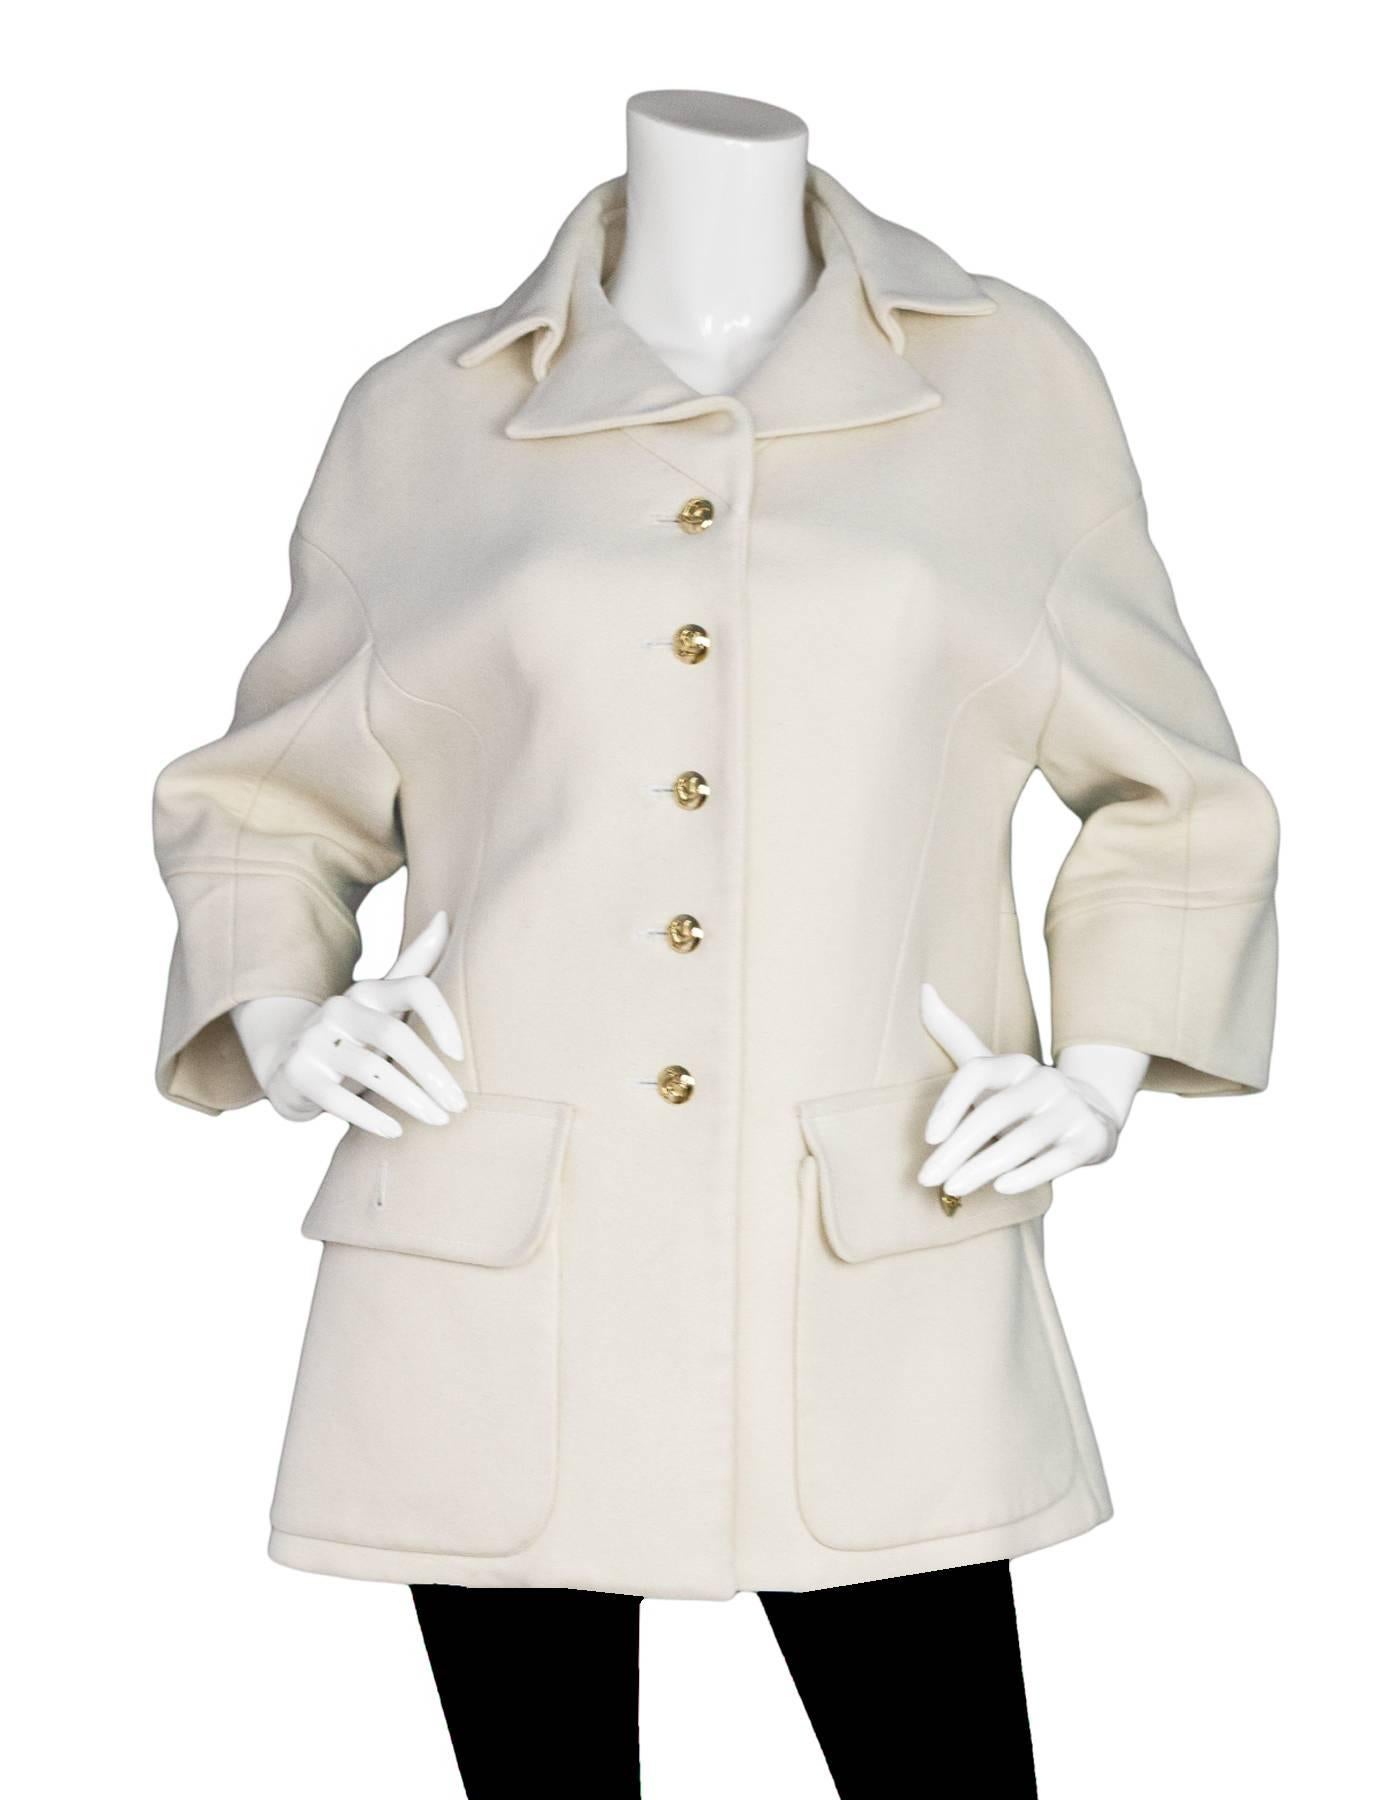 Louis Vuitton Cream Cashmere Coat Sz FR38

Made In: France
Color: Cream
Composition: 97% cashmere, 3% elastane
Lining: Cream textile
Closure/Opening: Front button closure
Exterior Pockets: Two hip flap pockets
Overall Condition: Very good pre-owned